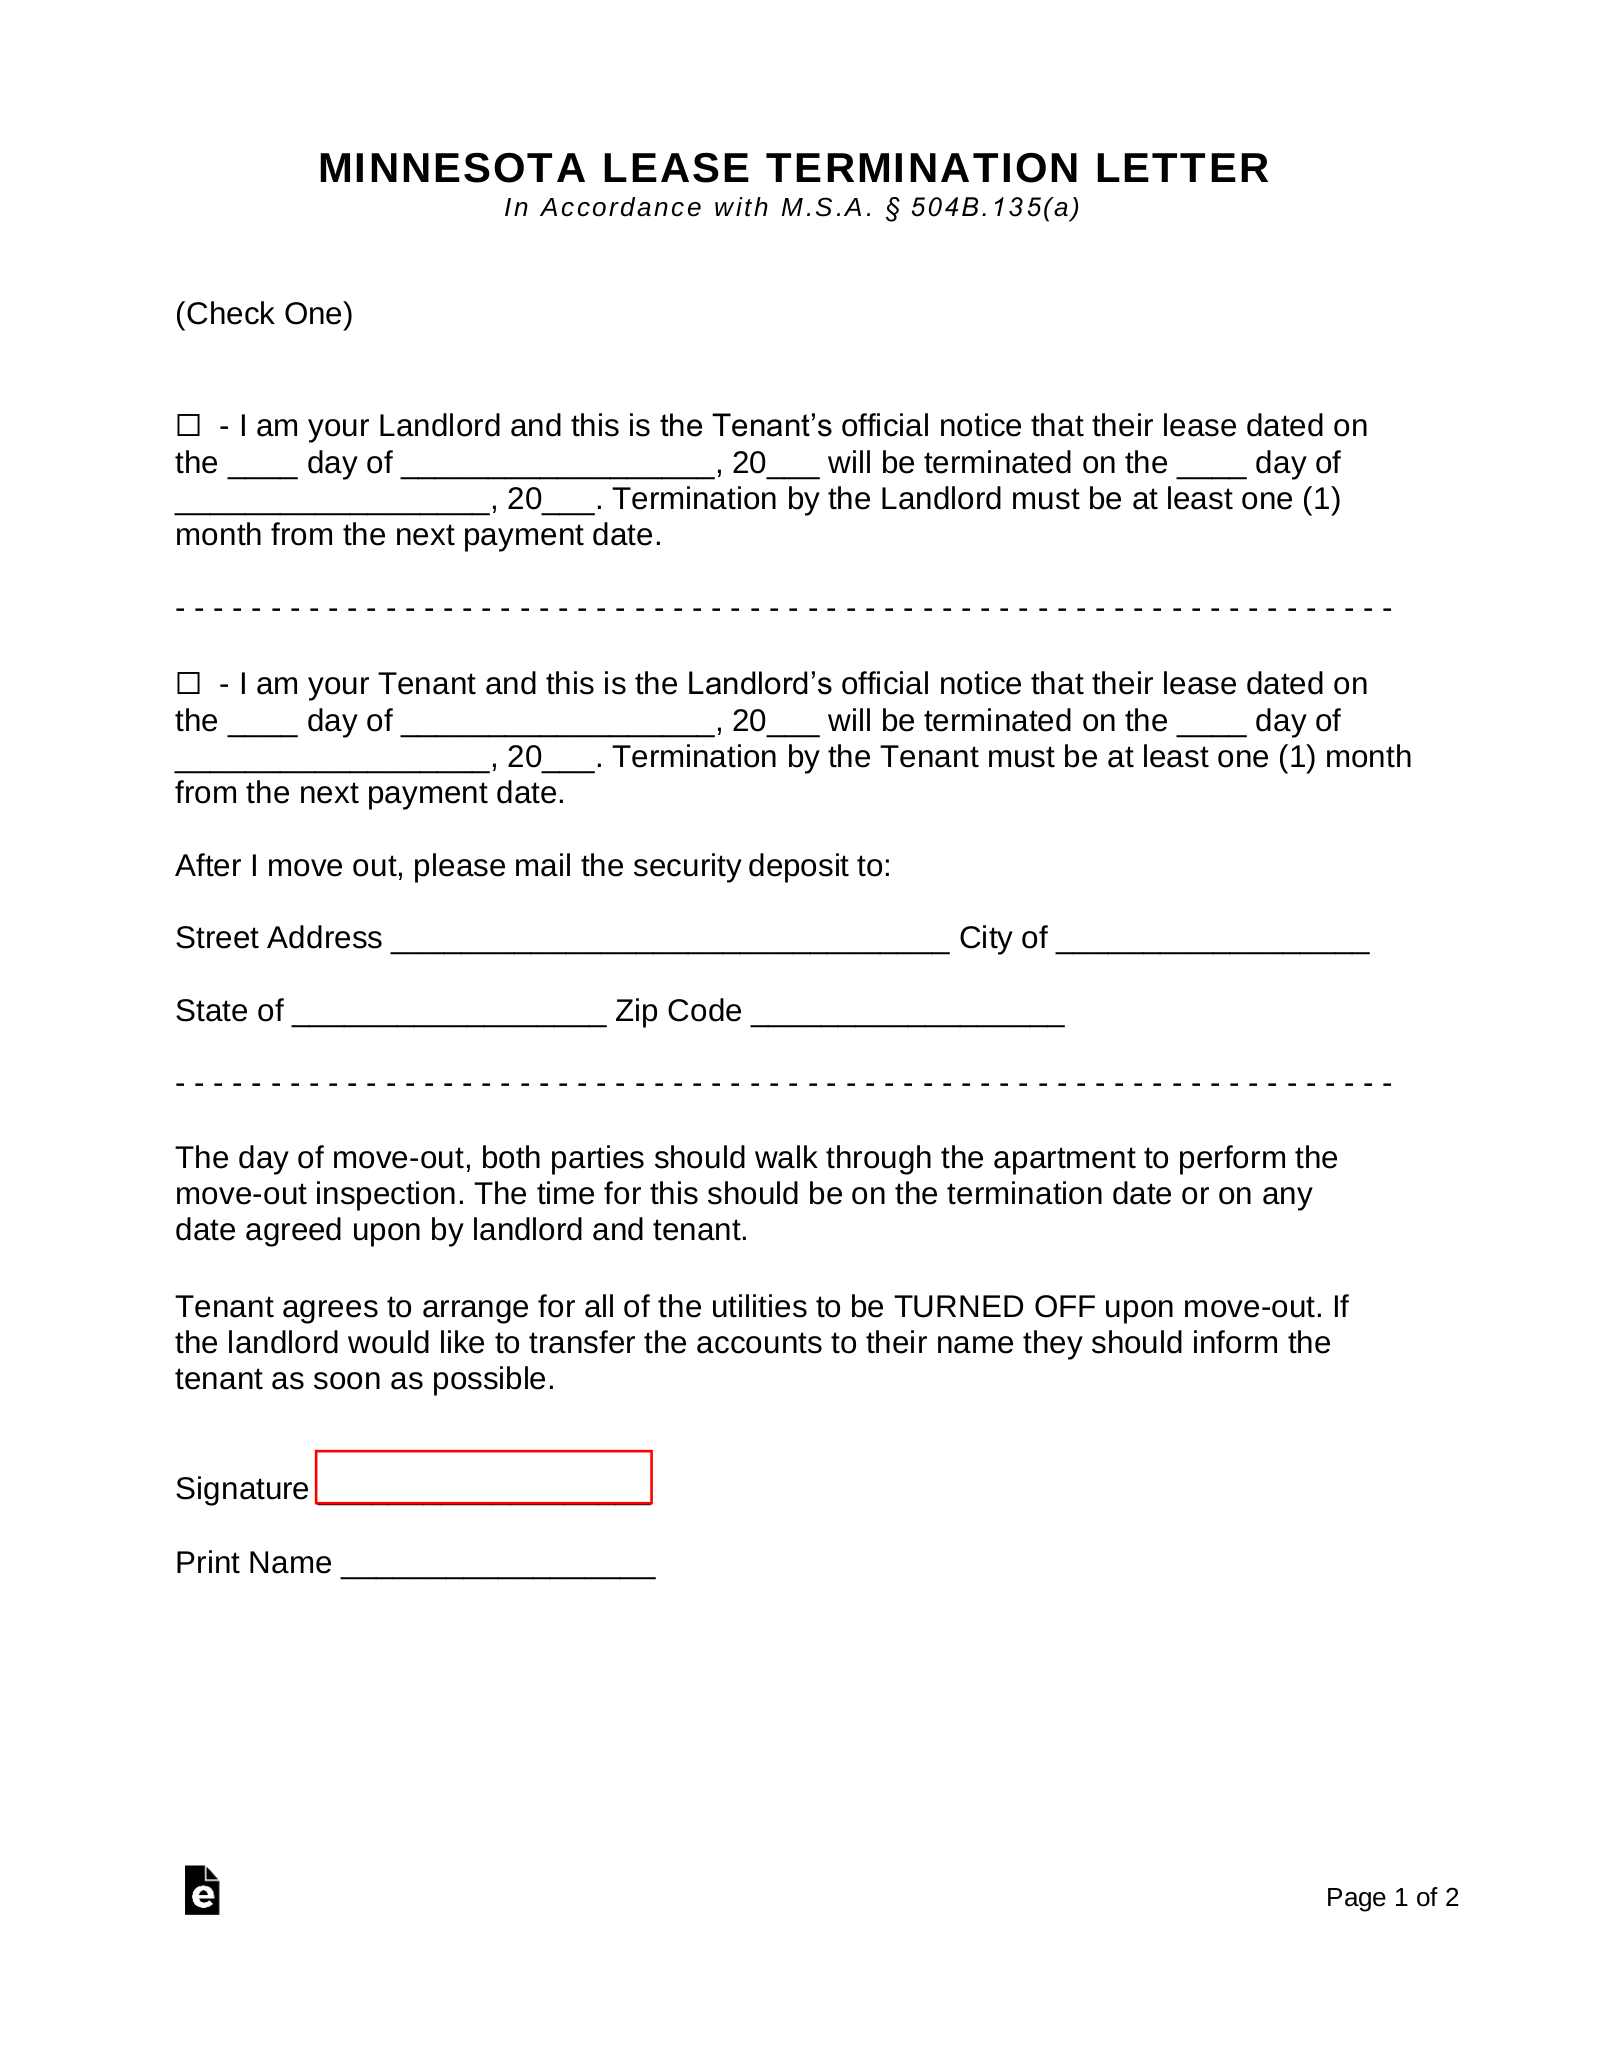 Rental Contract Termination Letter from eforms.com